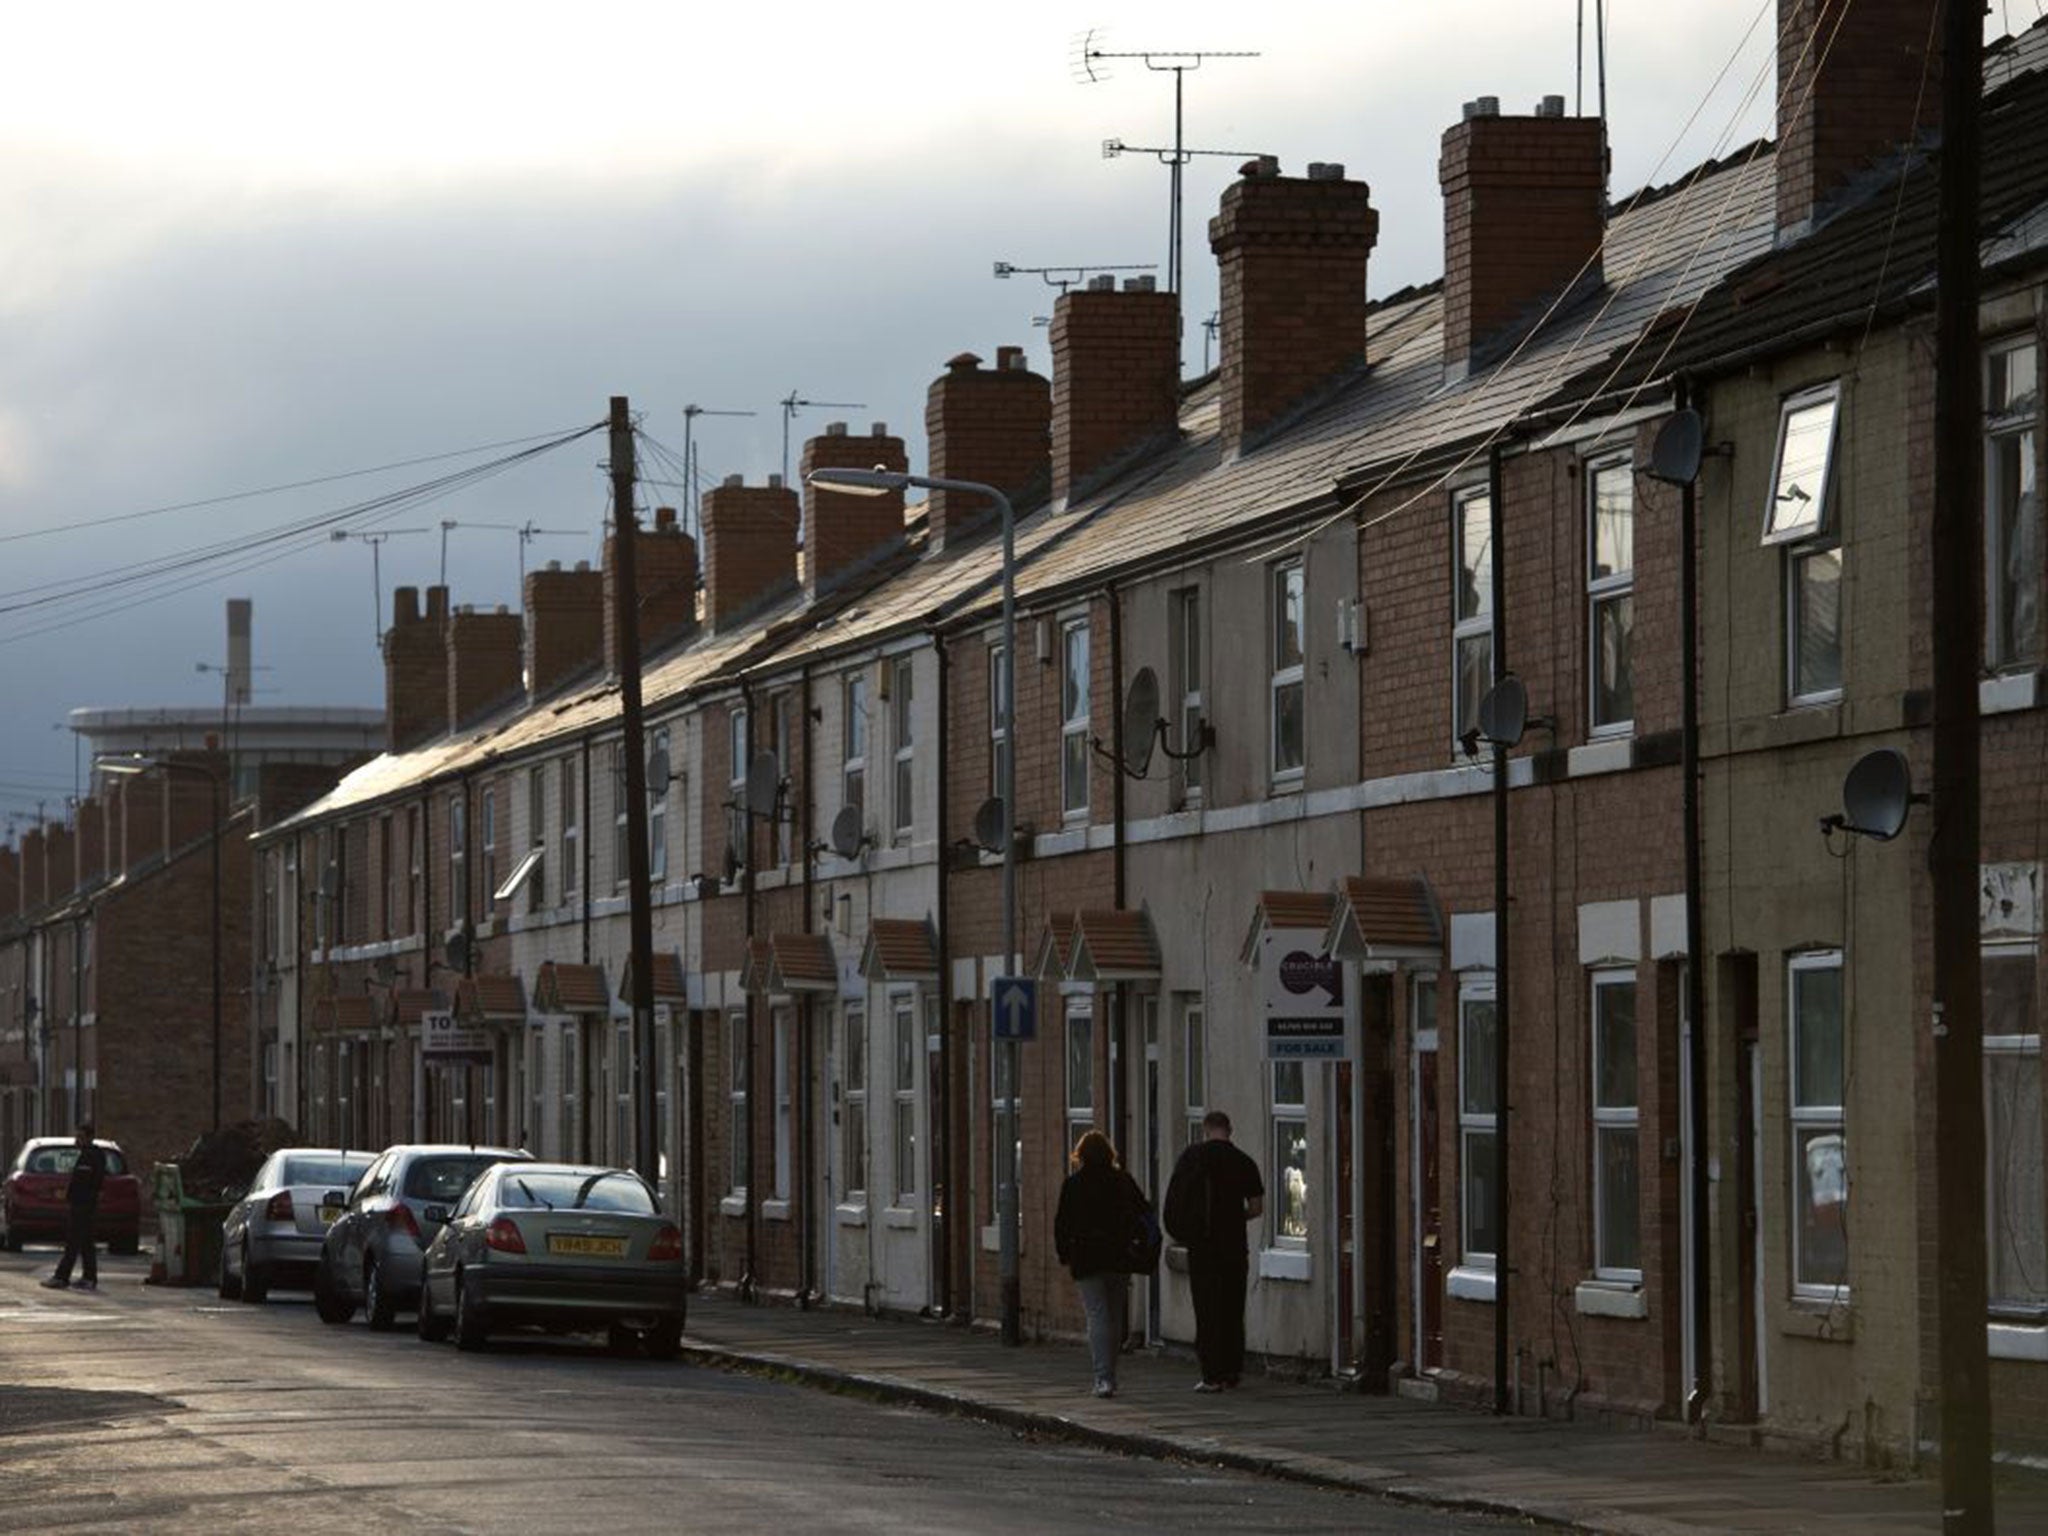 Rotherham, where abuse victims were ferried around in minicabs (AFP/Getty)